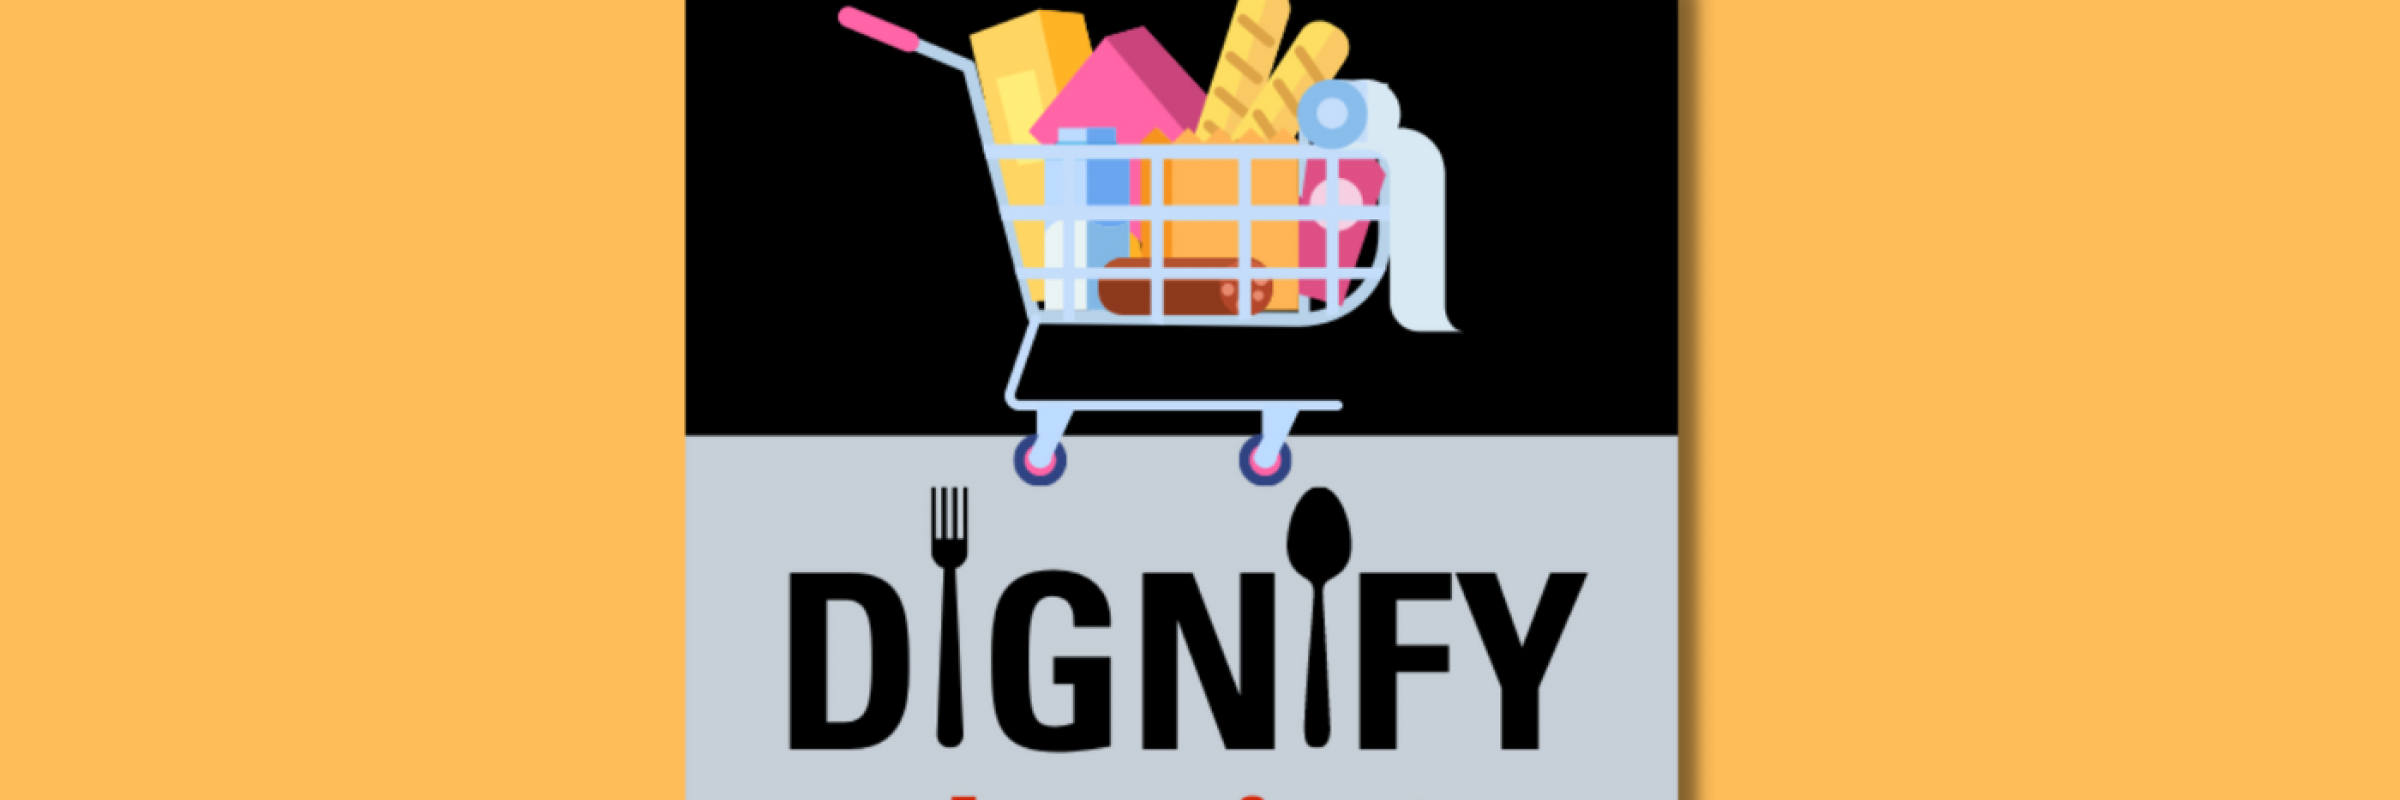 DIGNIFY